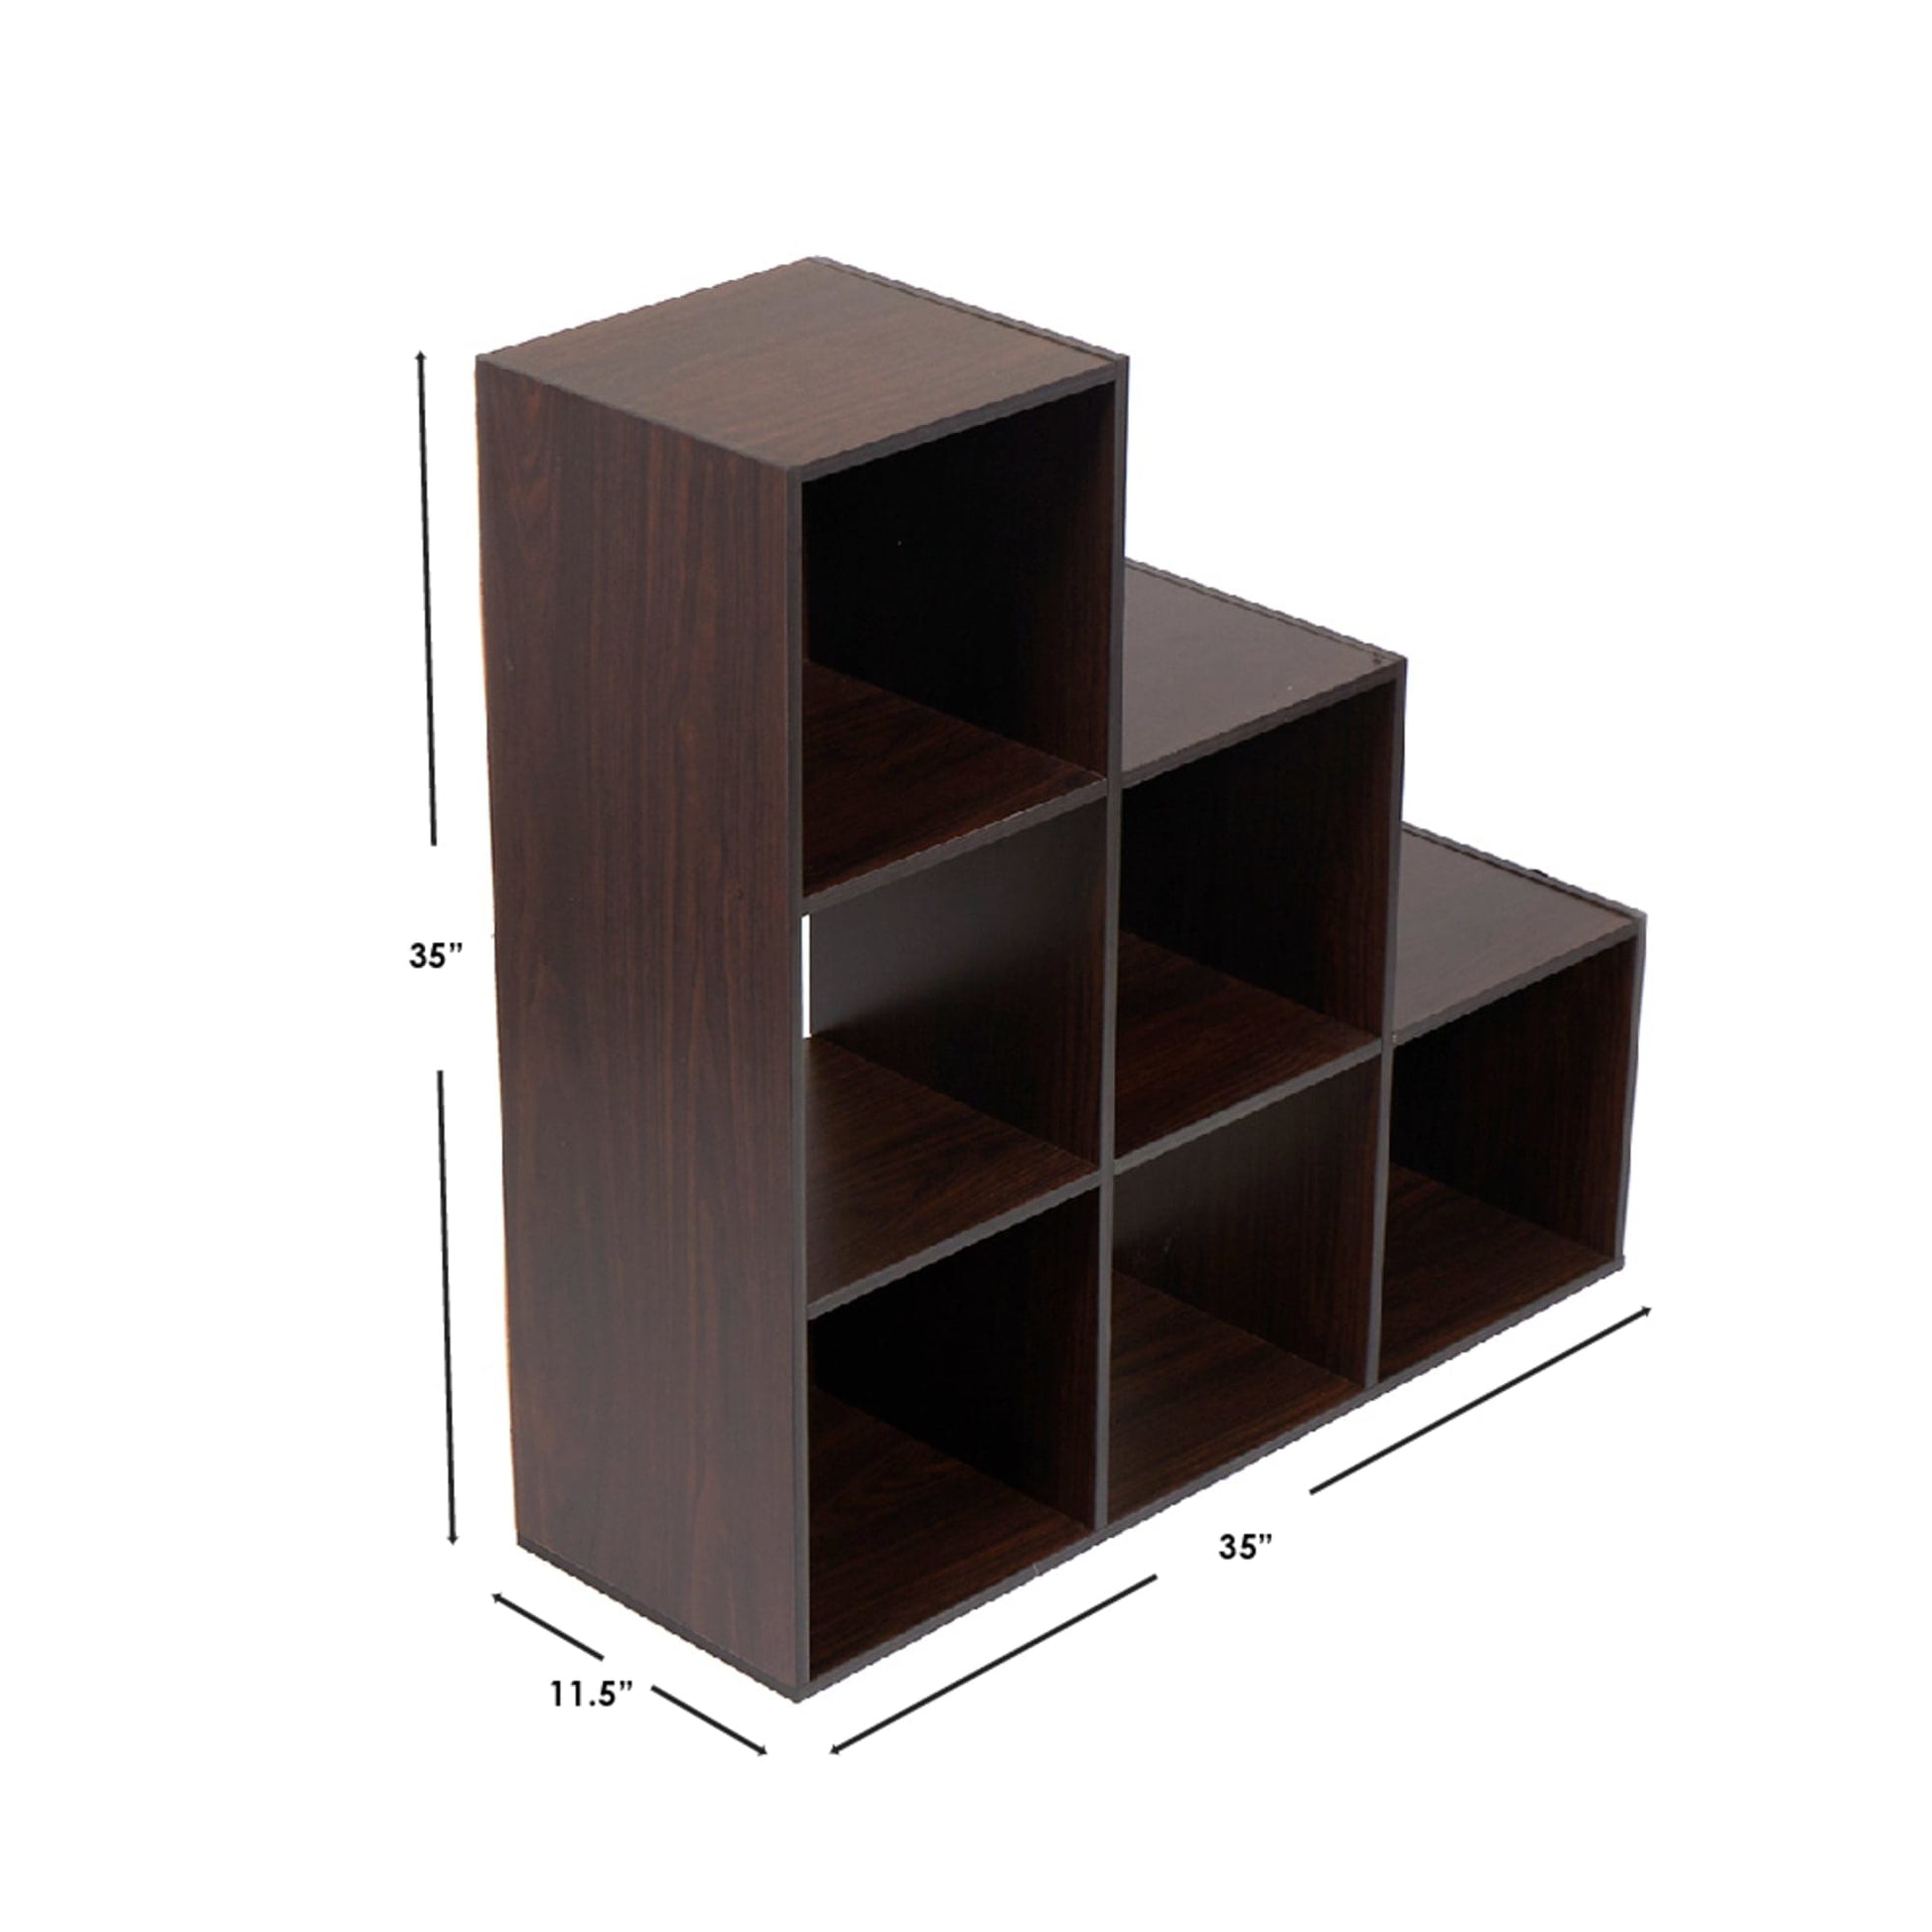 6 Pack: Modular Cube with Shelf by Simply Tidy™